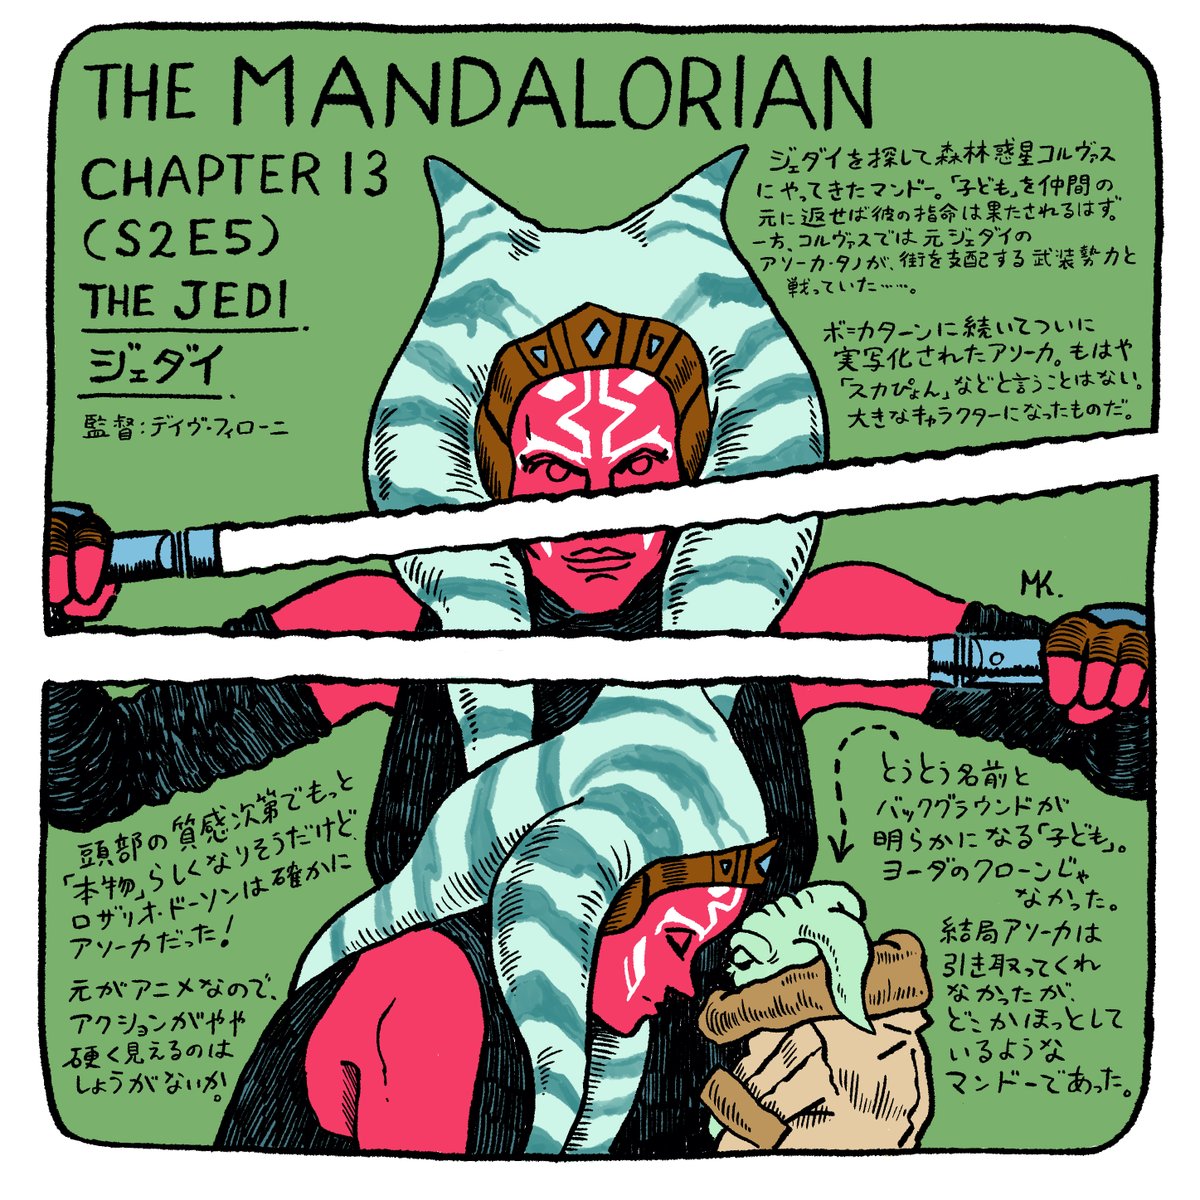 The Mandalorian
Chapter 11: The Heiress
Chapter 12: The Siege
Chapter 13: The Jedi
#TheMandalorian 